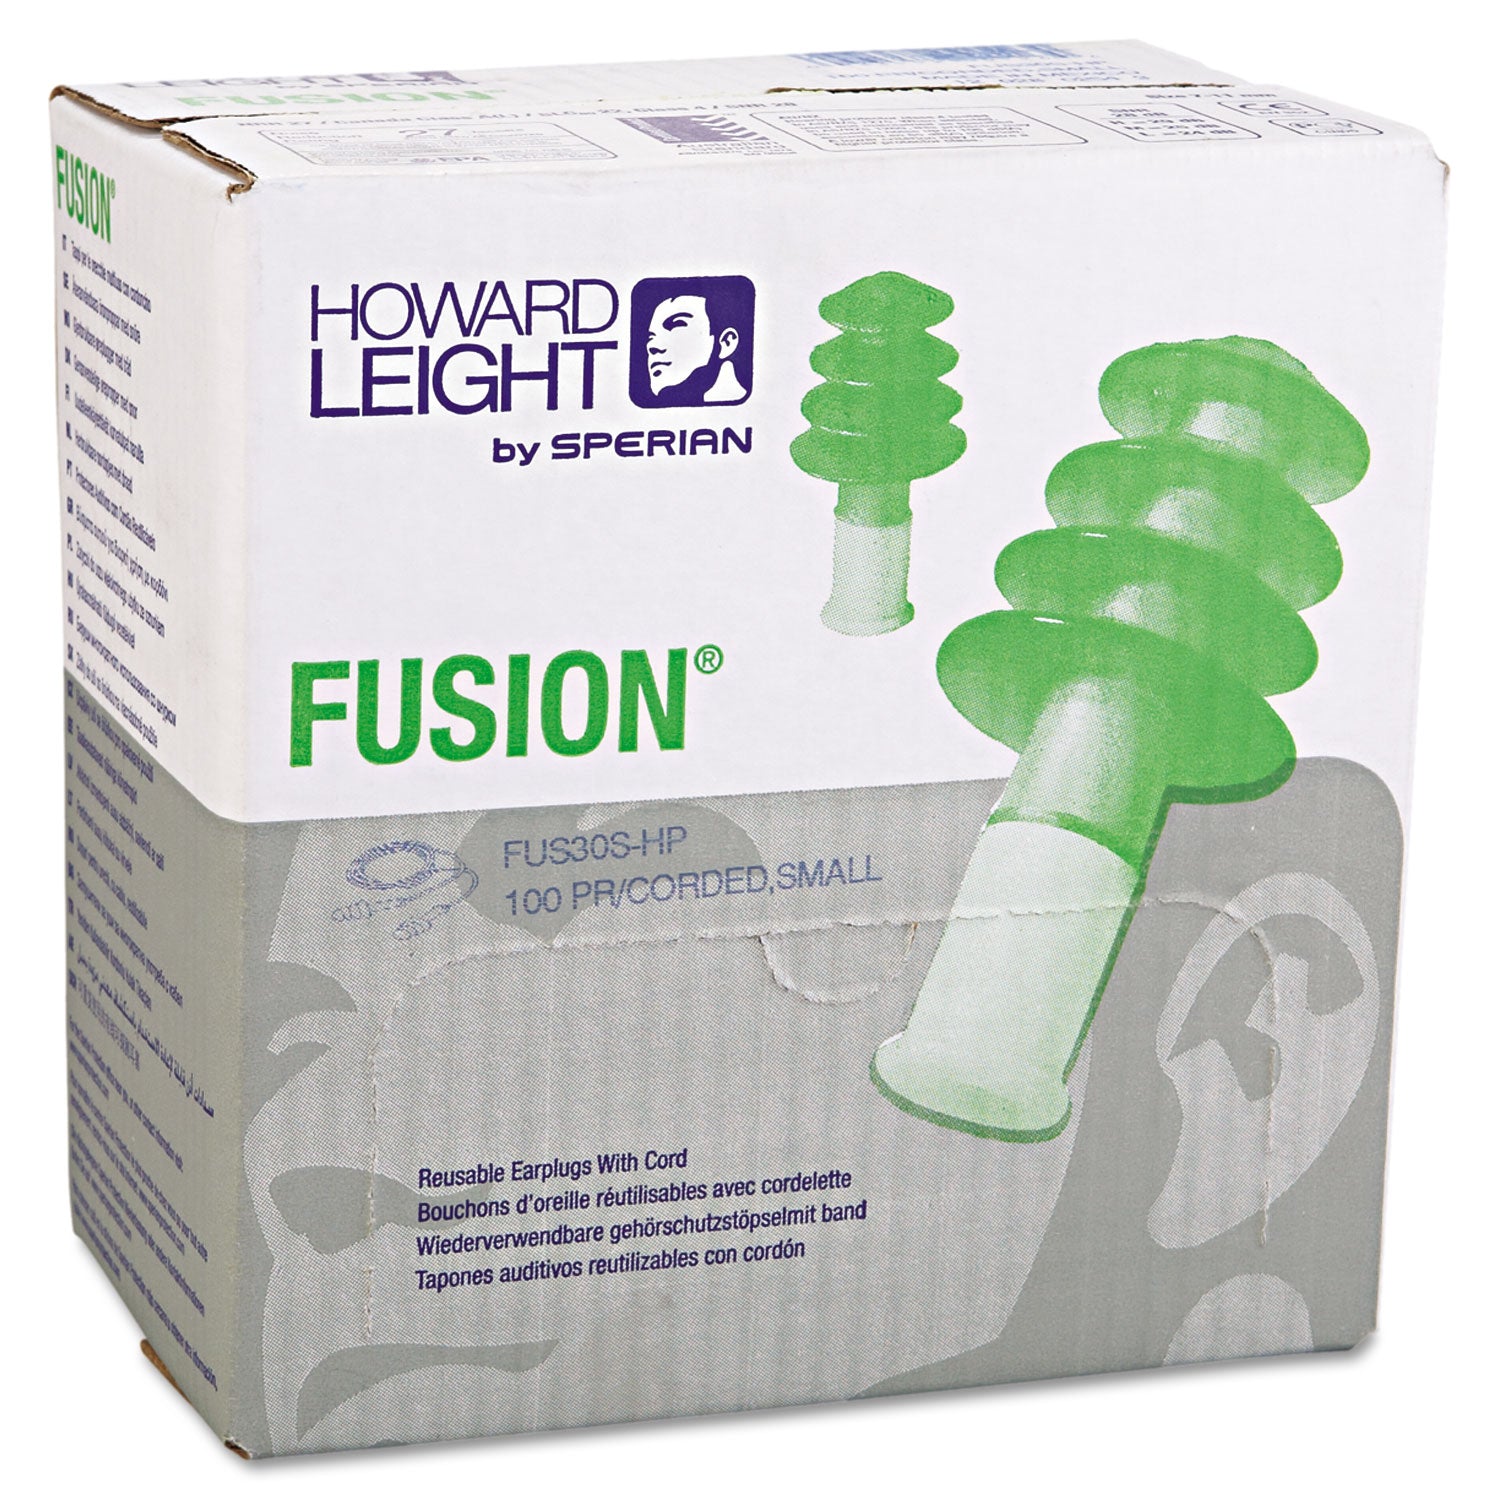 FUS30S-HP Fusion Multiple-Use Earplugs, Small, 27NRR, Corded, GN/WE, 100 Pairs - 